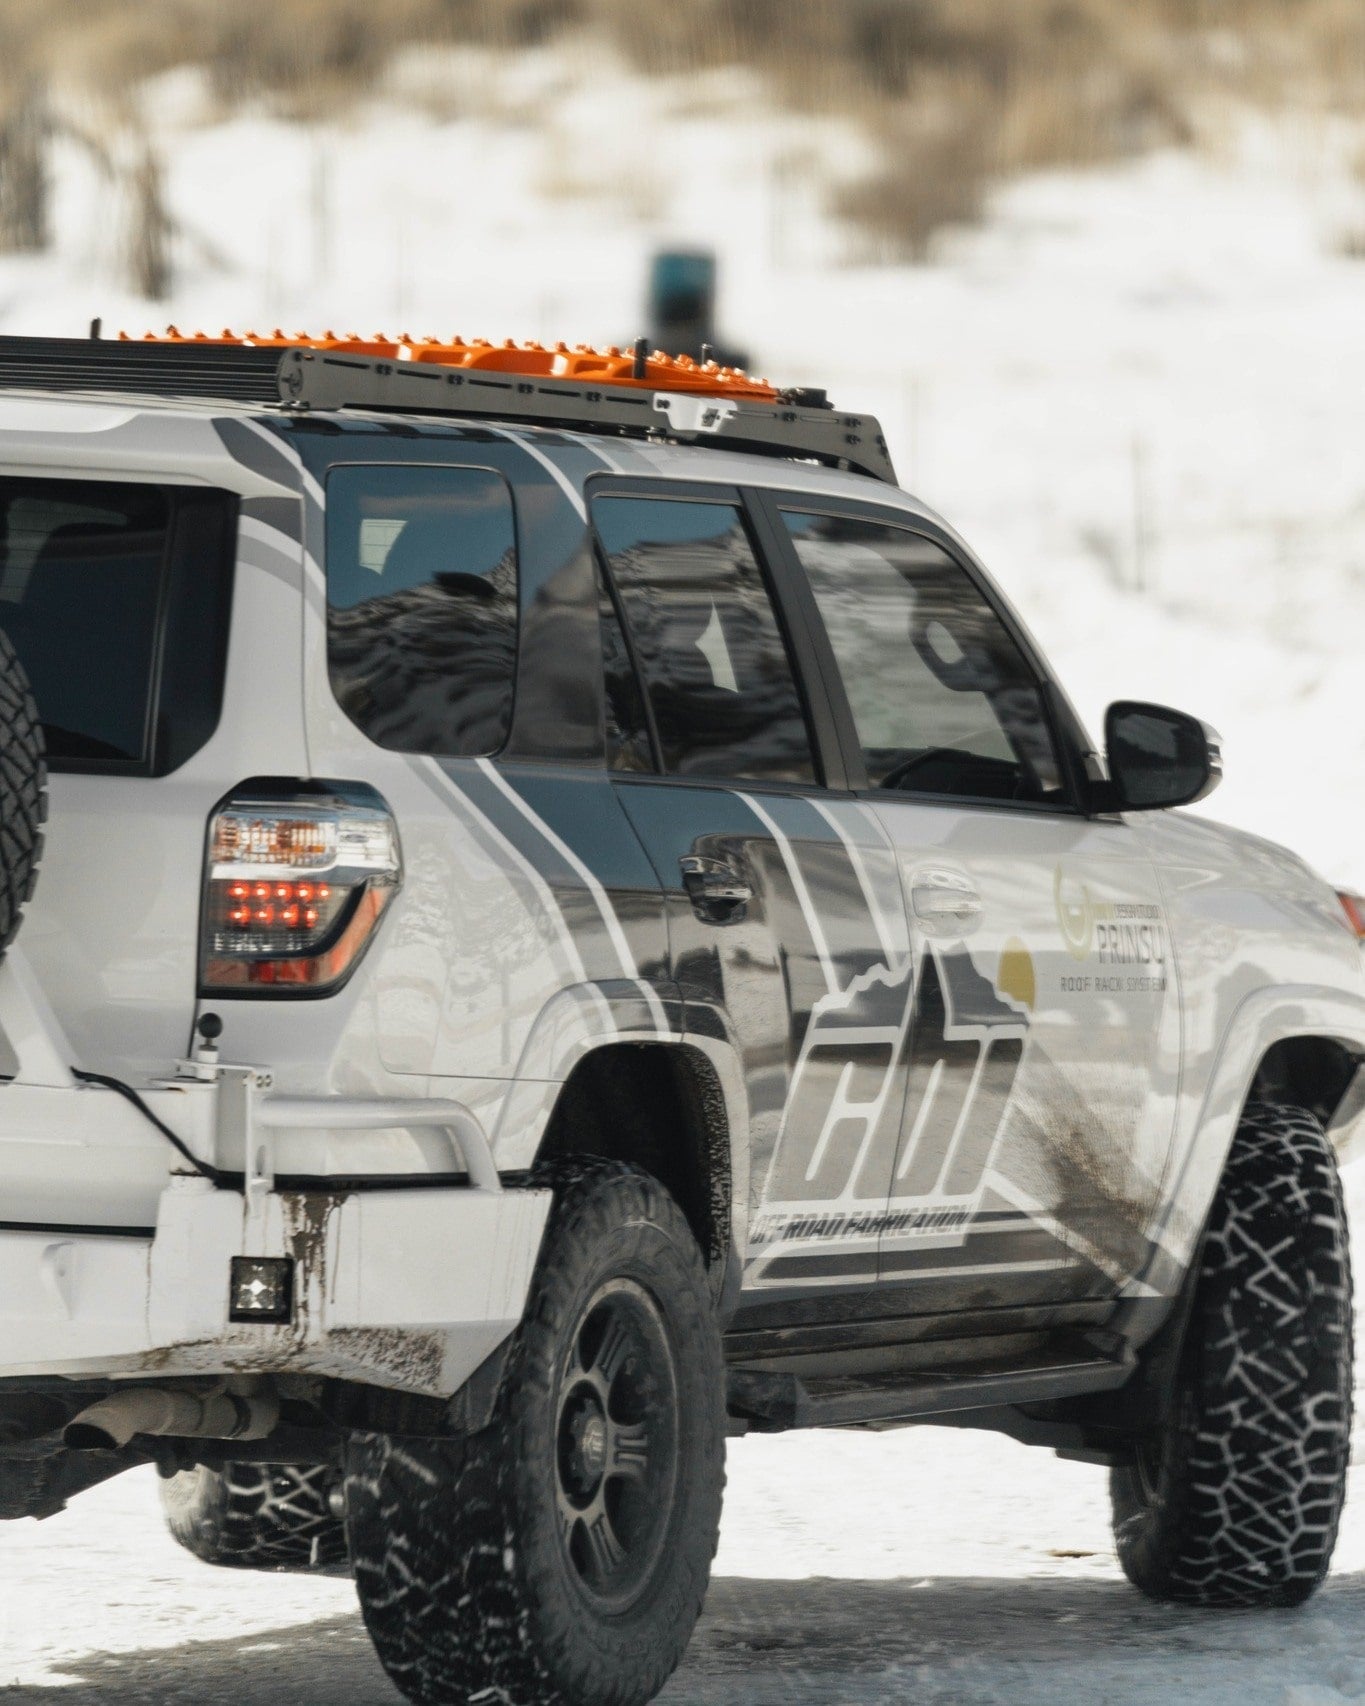 Prinsu Rack on top of a white 4Runner driving in the snow - Truck Brigade